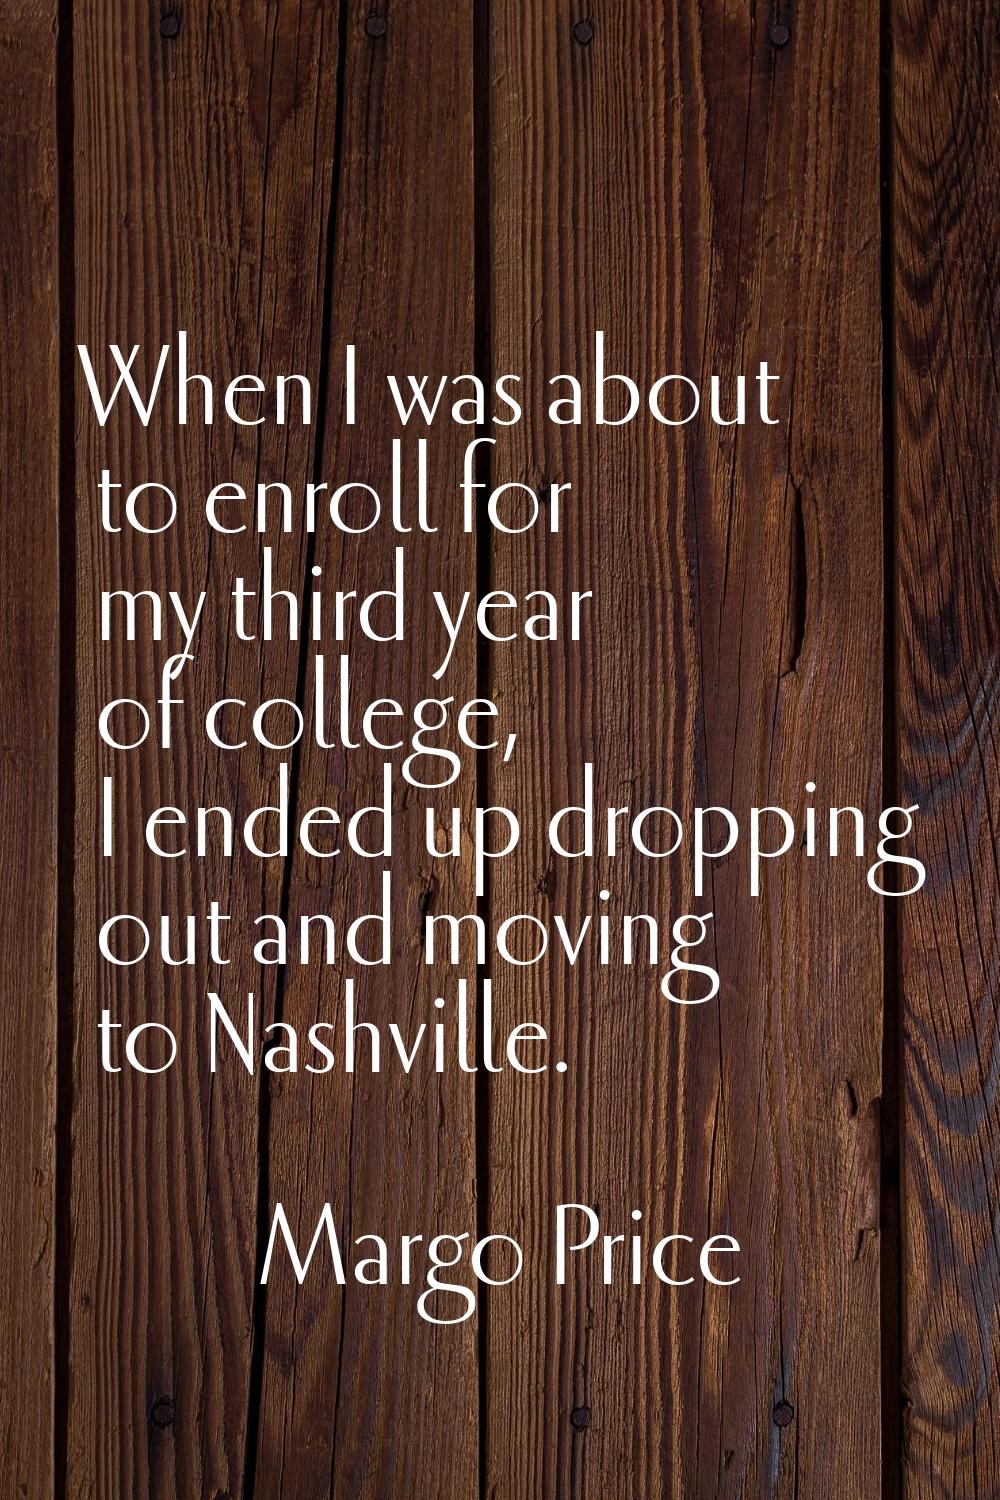 When I was about to enroll for my third year of college, I ended up dropping out and moving to Nash